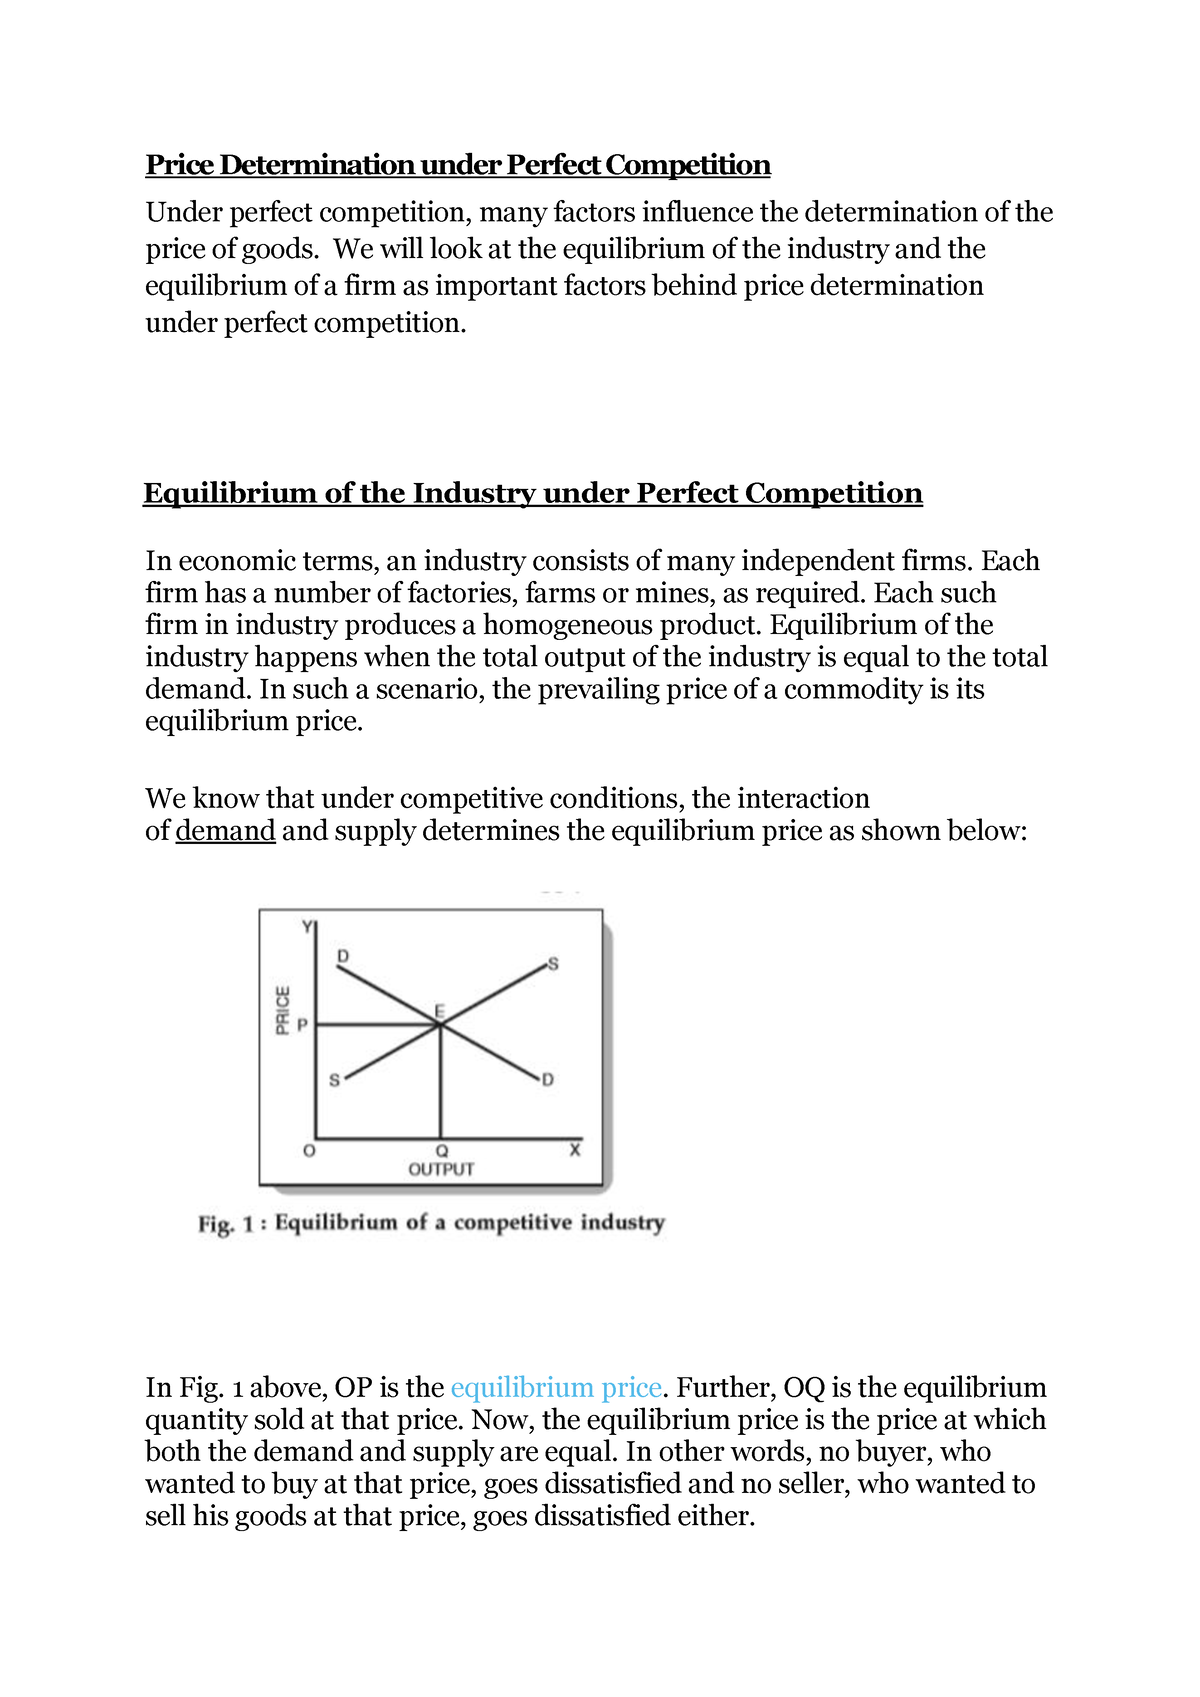 price determination under perfect competition notes